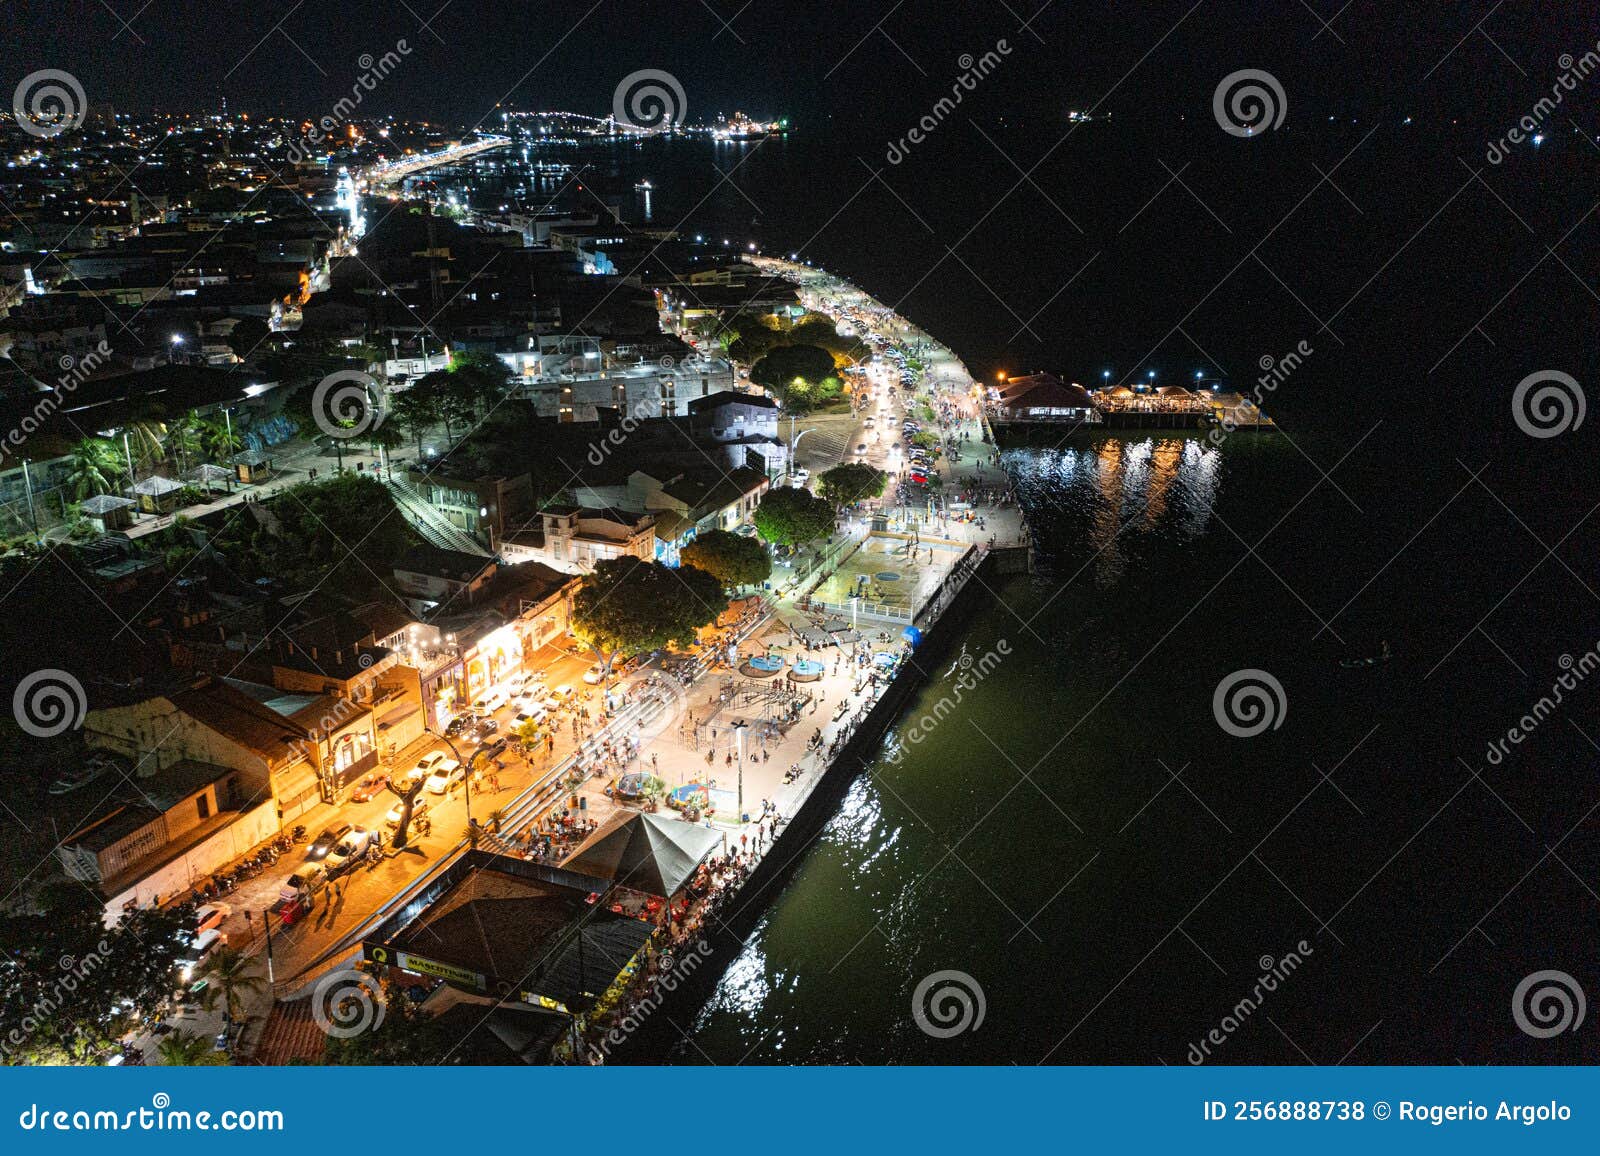 night aerial photo of the waterfront of the city of santarÃÂ©m on the tapajÃÂ³s river, parÃÂ¡, brazil.